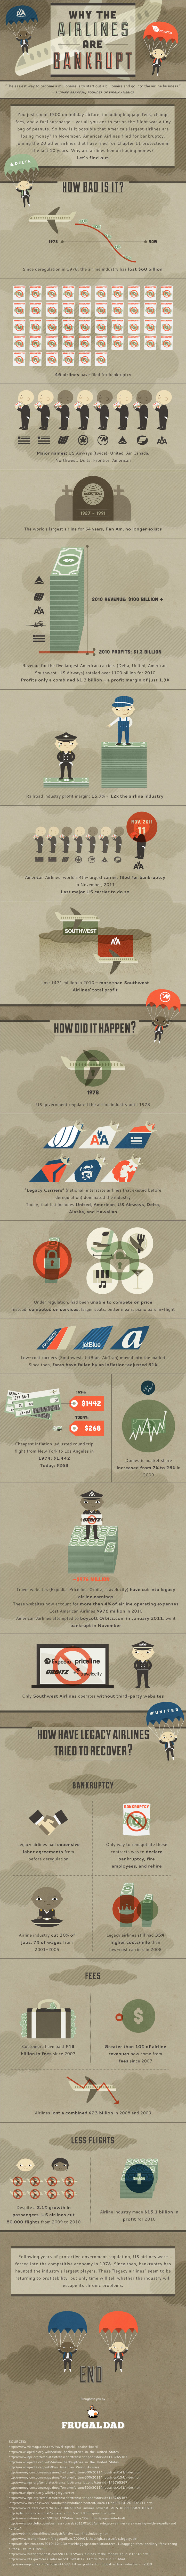 Why the Airlines Are Bankrupt